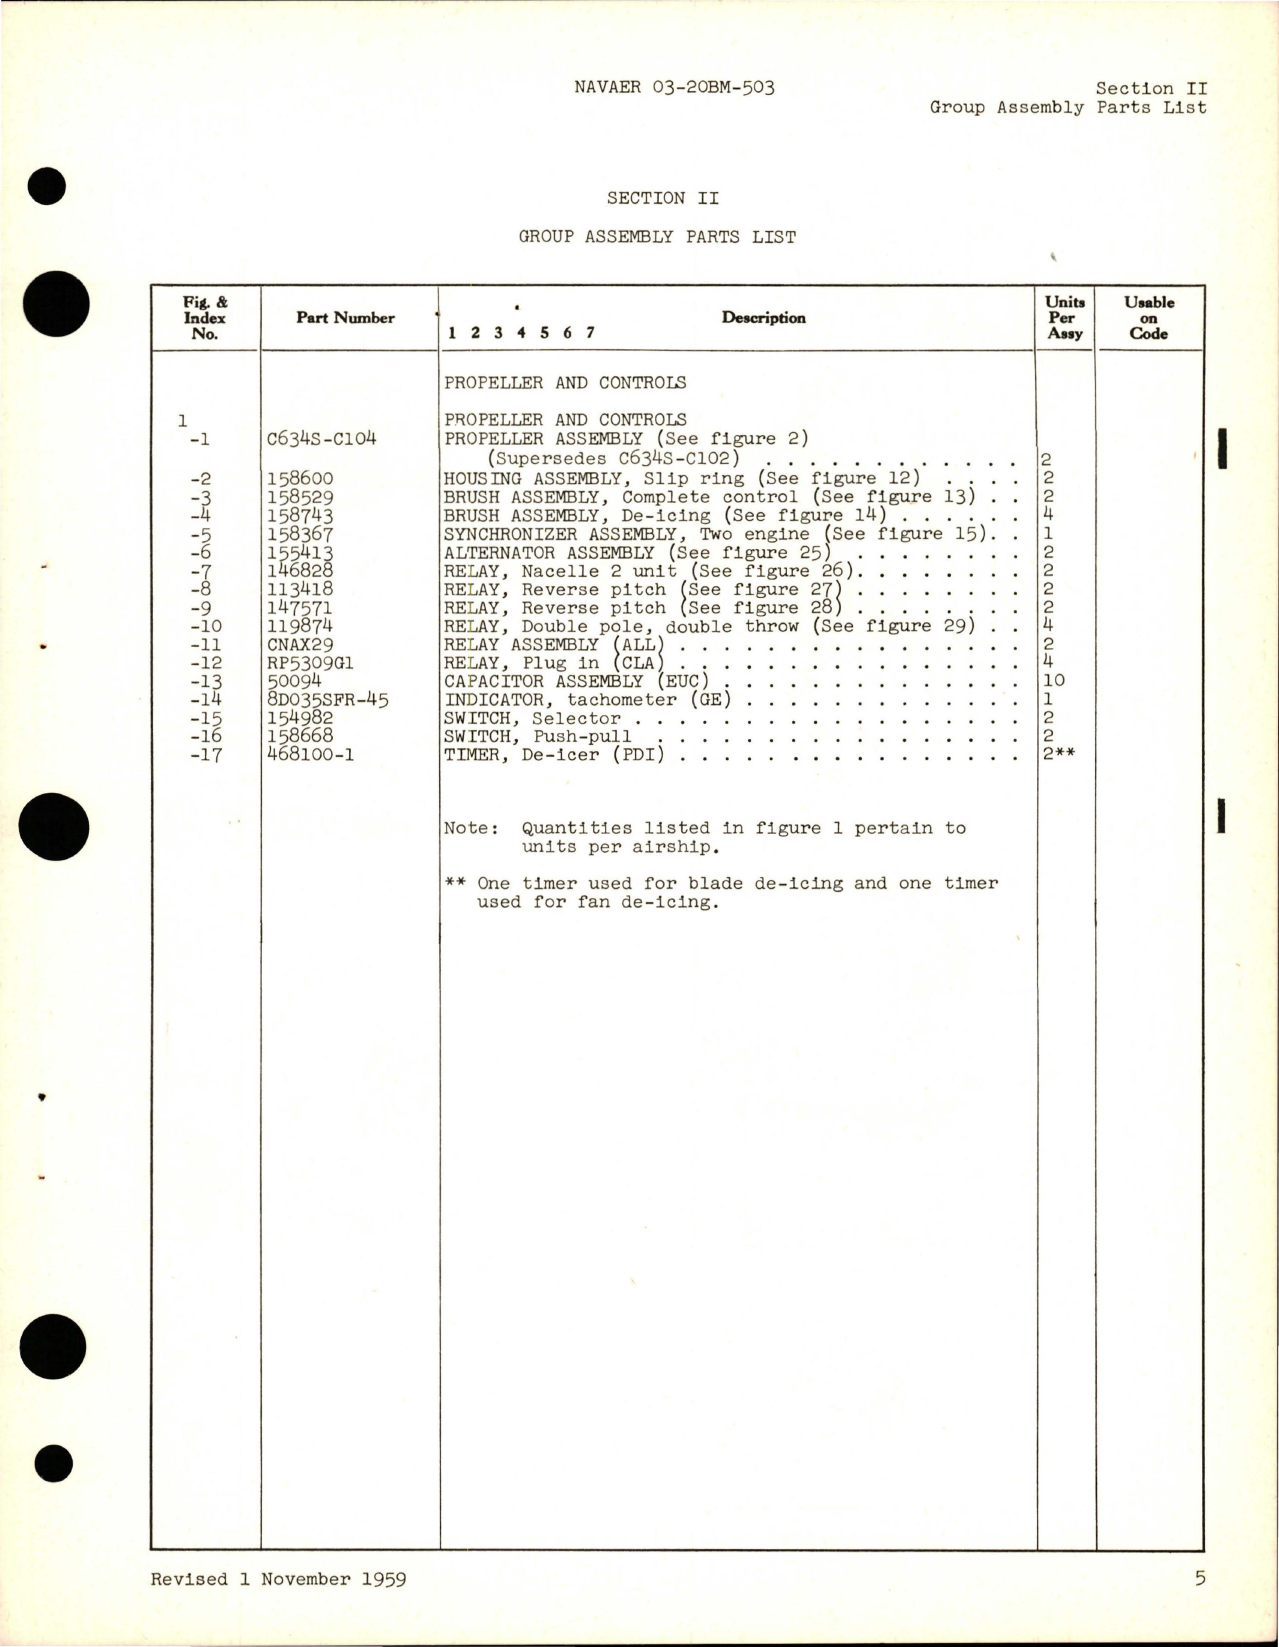 Sample page 9 from AirCorps Library document: Illustrated Parts Breakdown for Propeller and Controls - Model C634S-C104 